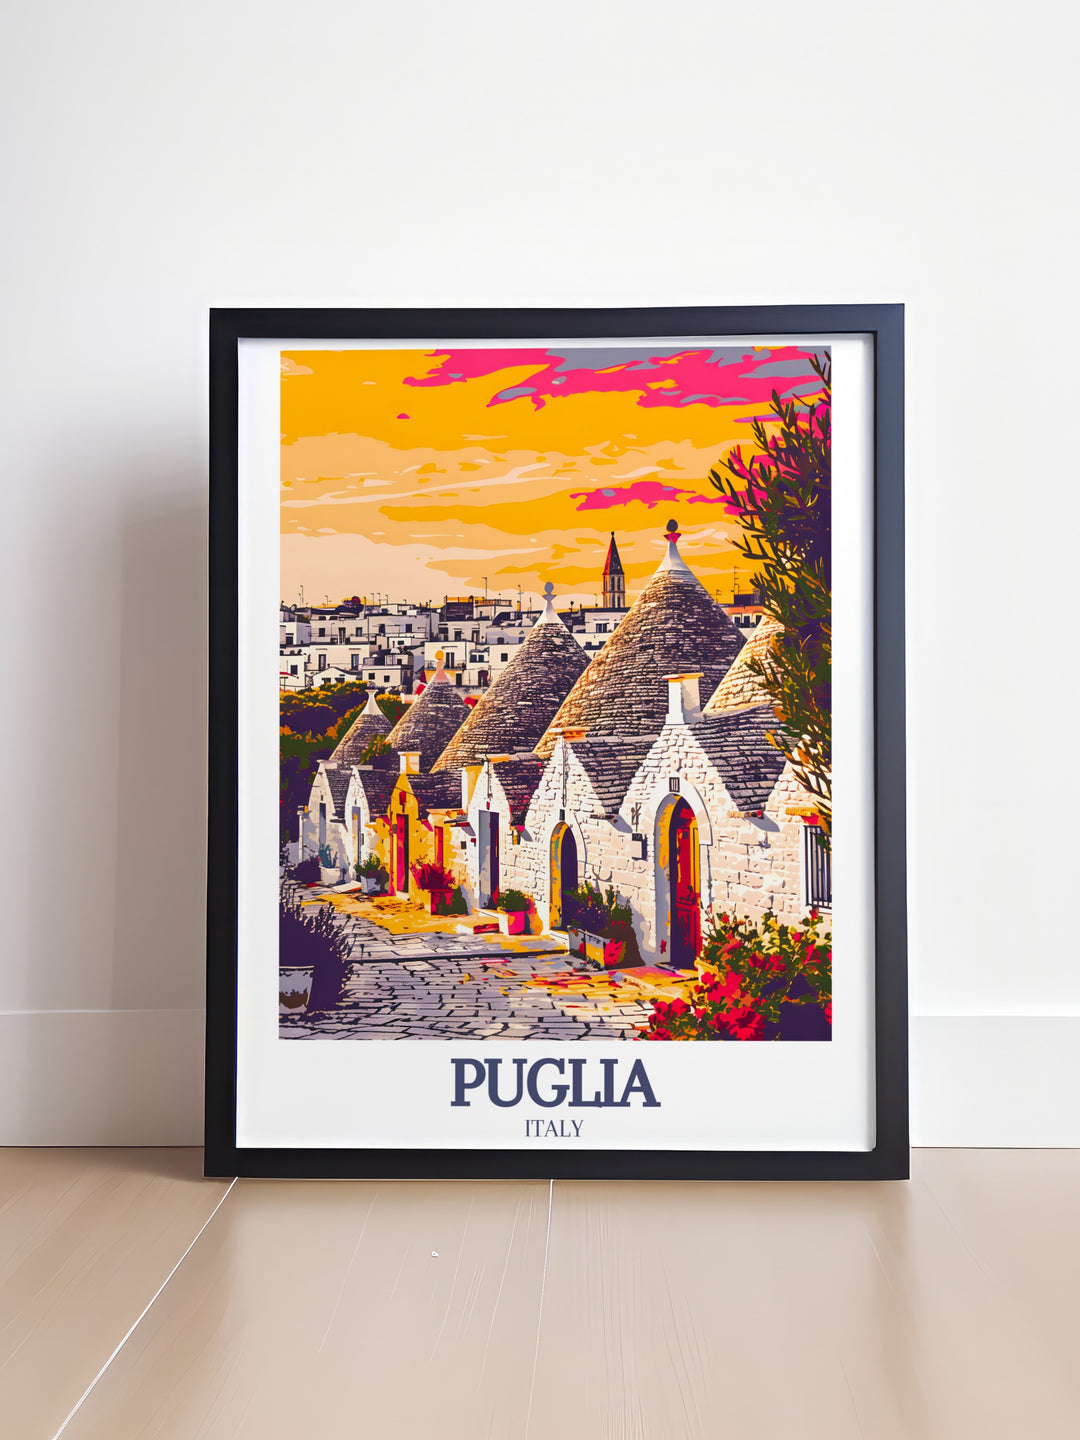 Bring the charm of Trulli houses in Alberobello into your home with our Puglia Art. This Italy Travel Print captures the beauty of Italys iconic Trulli houses, perfect for any art enthusiast.